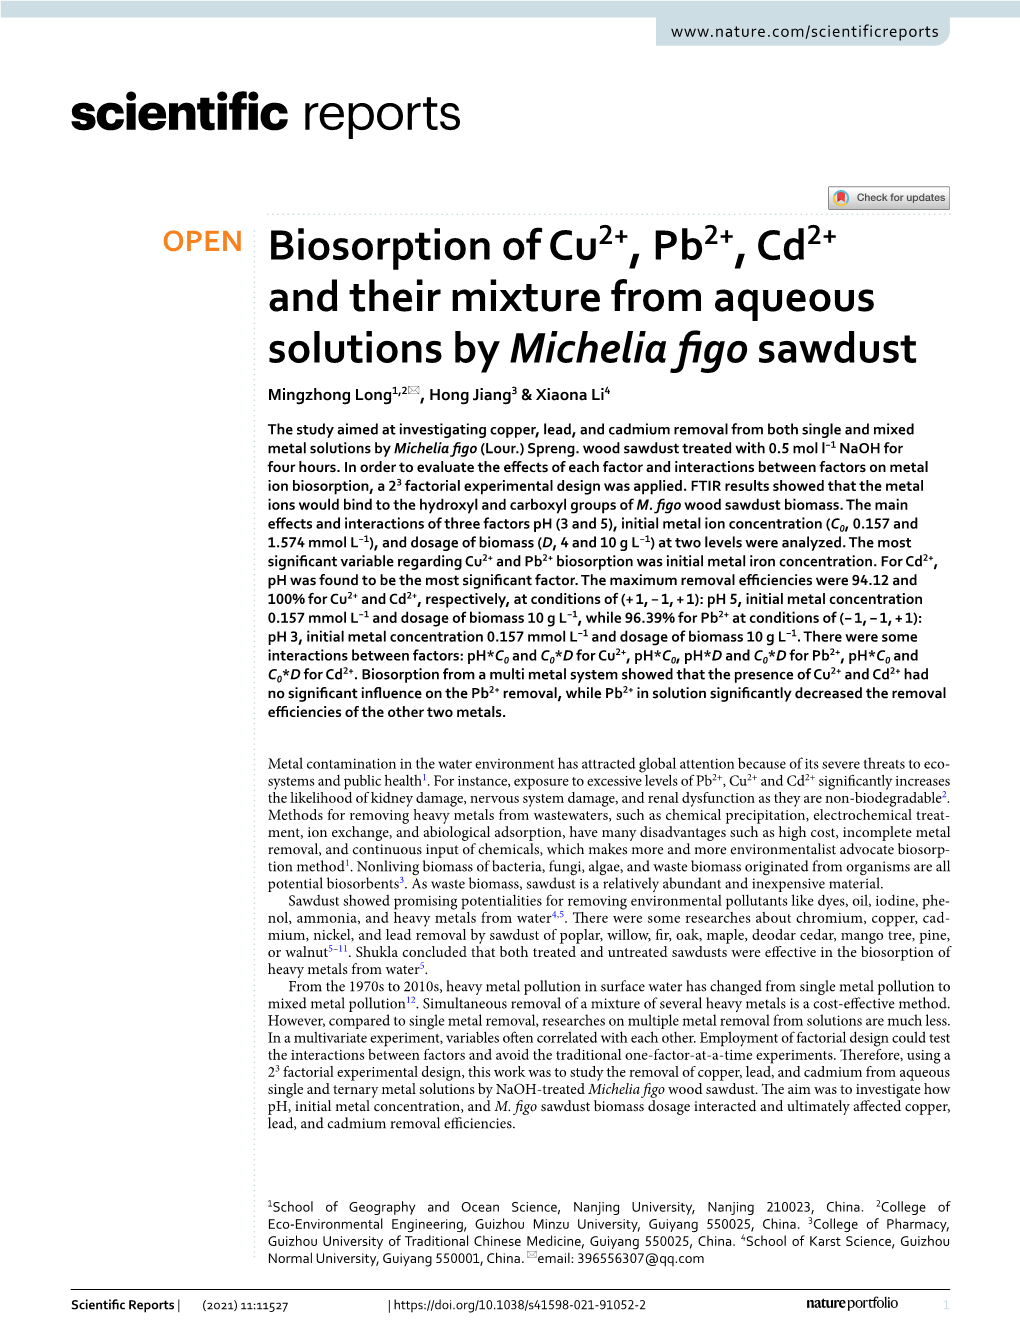 Biosorption of Cu2+, Pb2+, Cd2+ and Their Mixture from Aqueous